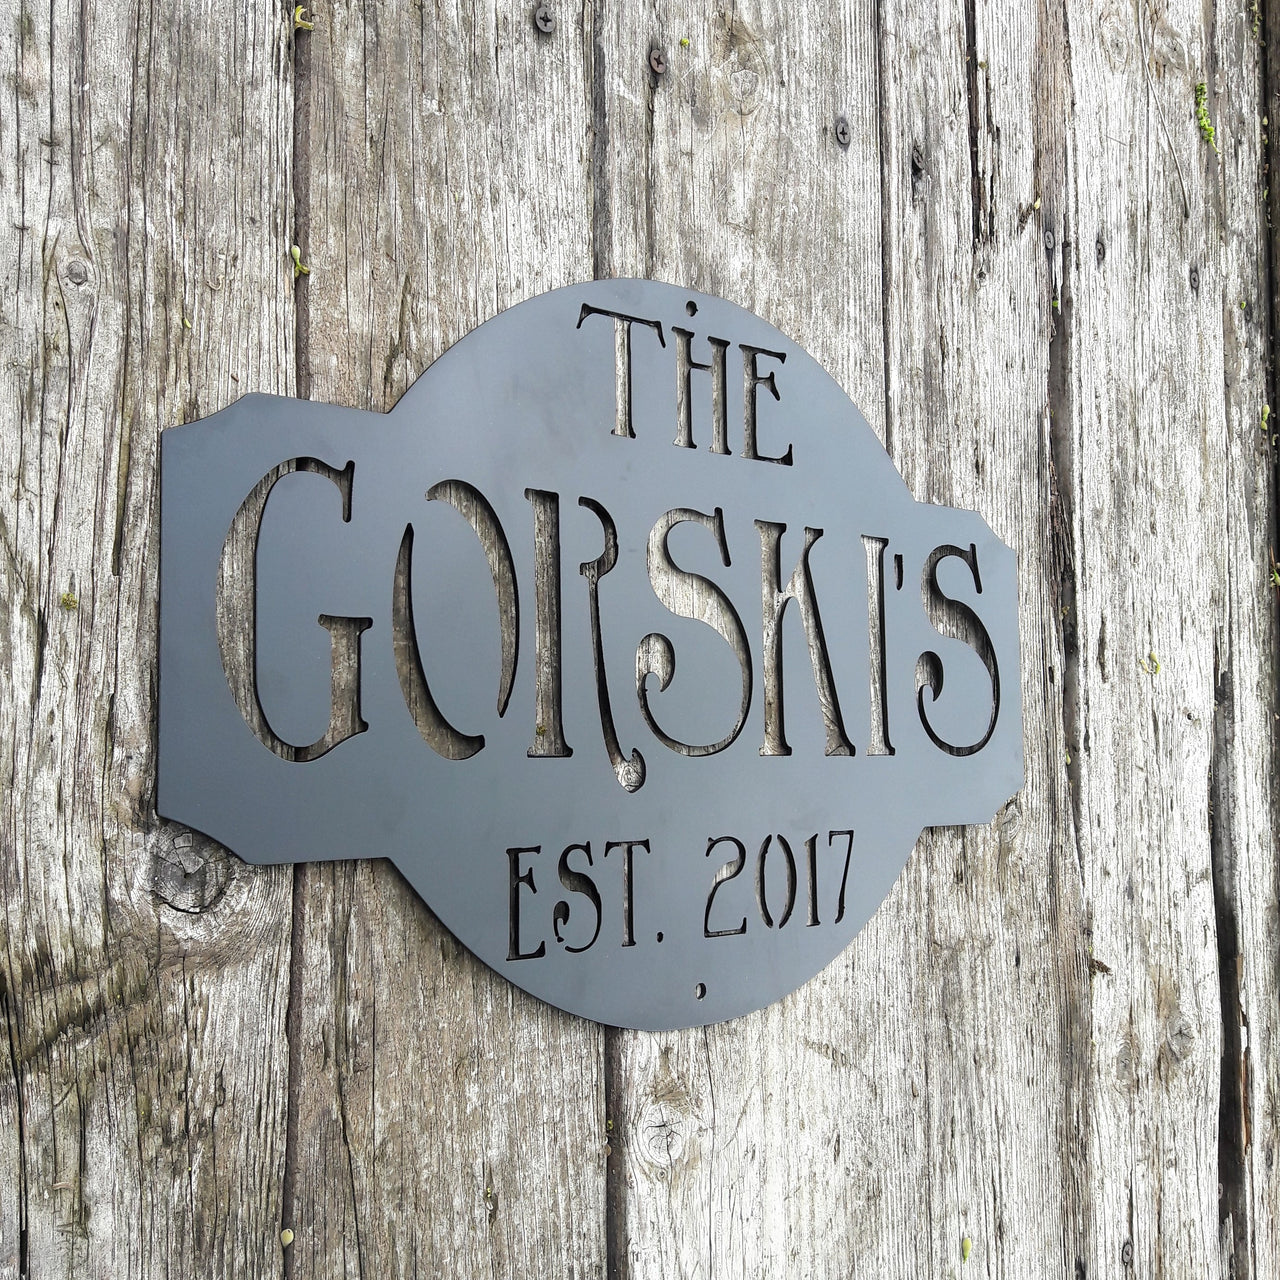 Rustic metal sign outdoor black powder coated. The sign reads, " The Gorski's est. 2017"